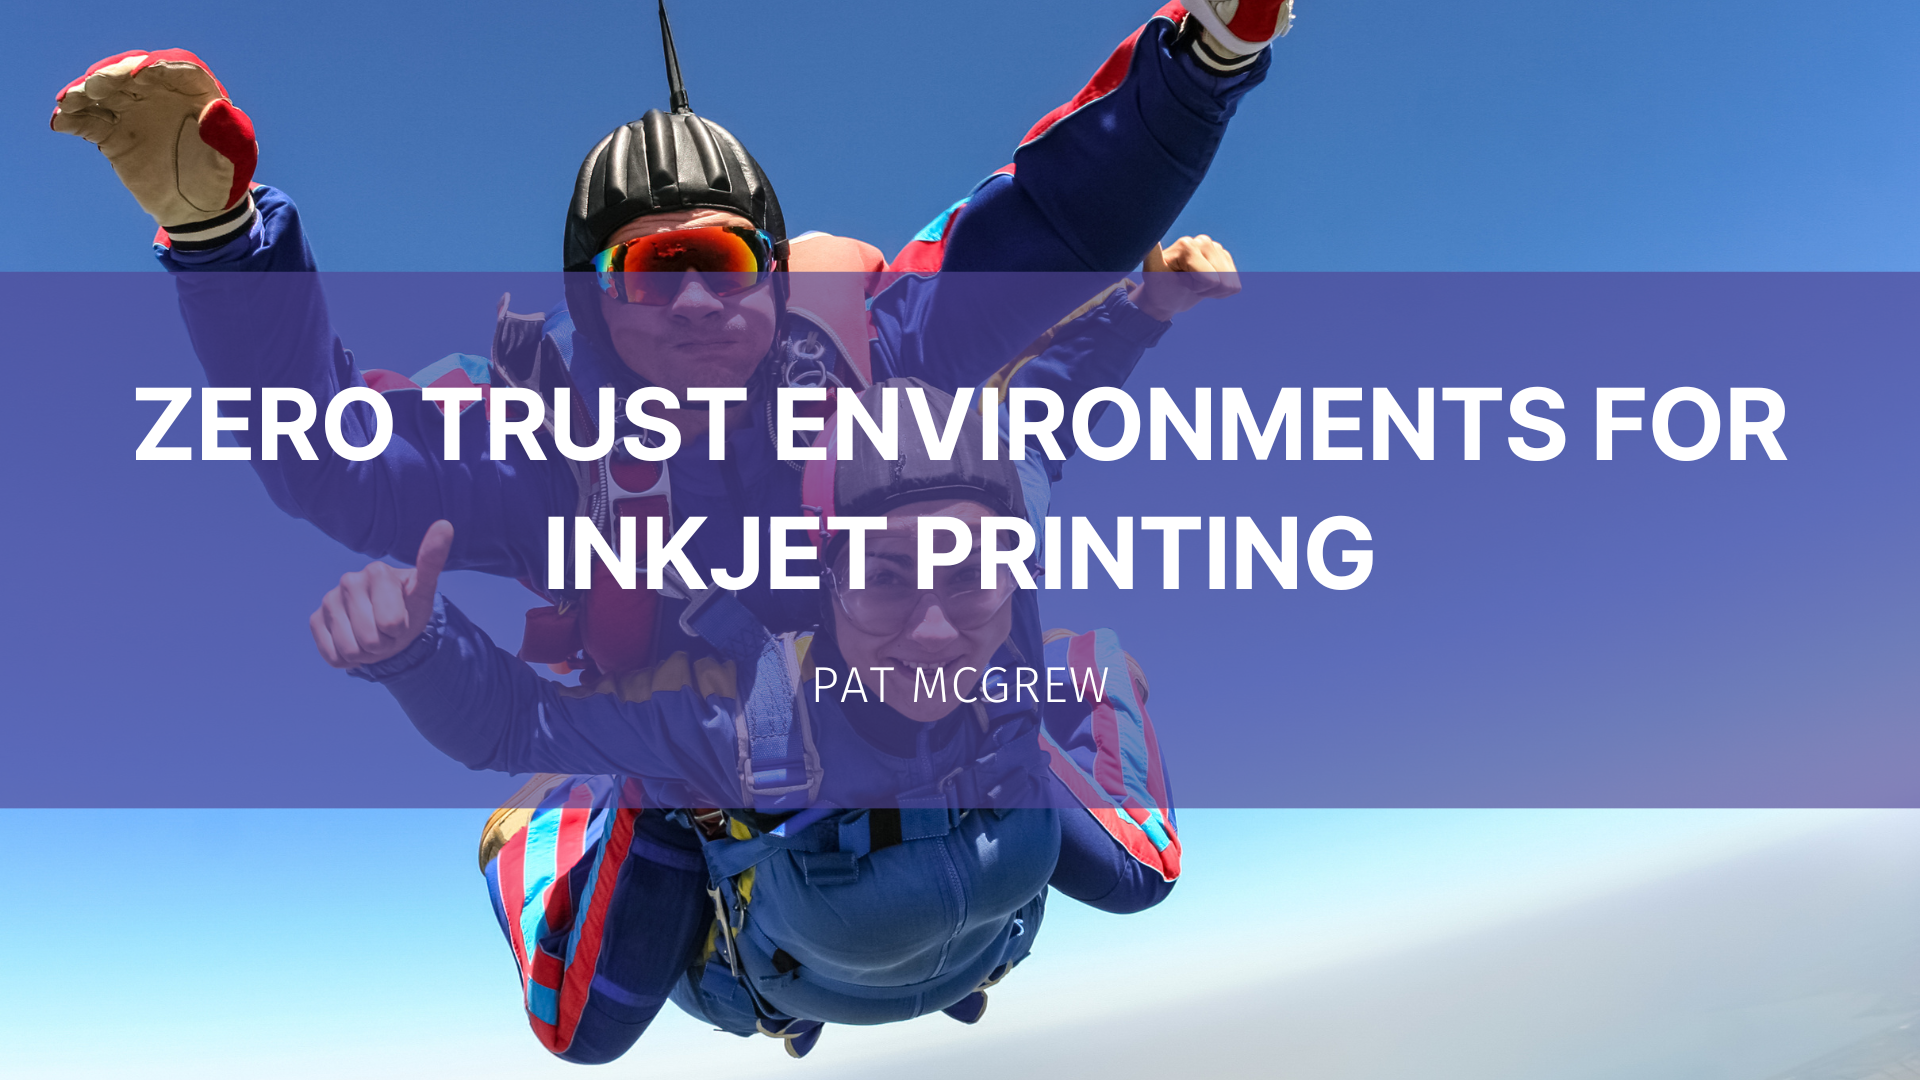 Featured image for “Zero Trust Environments for Inkjet Printing”